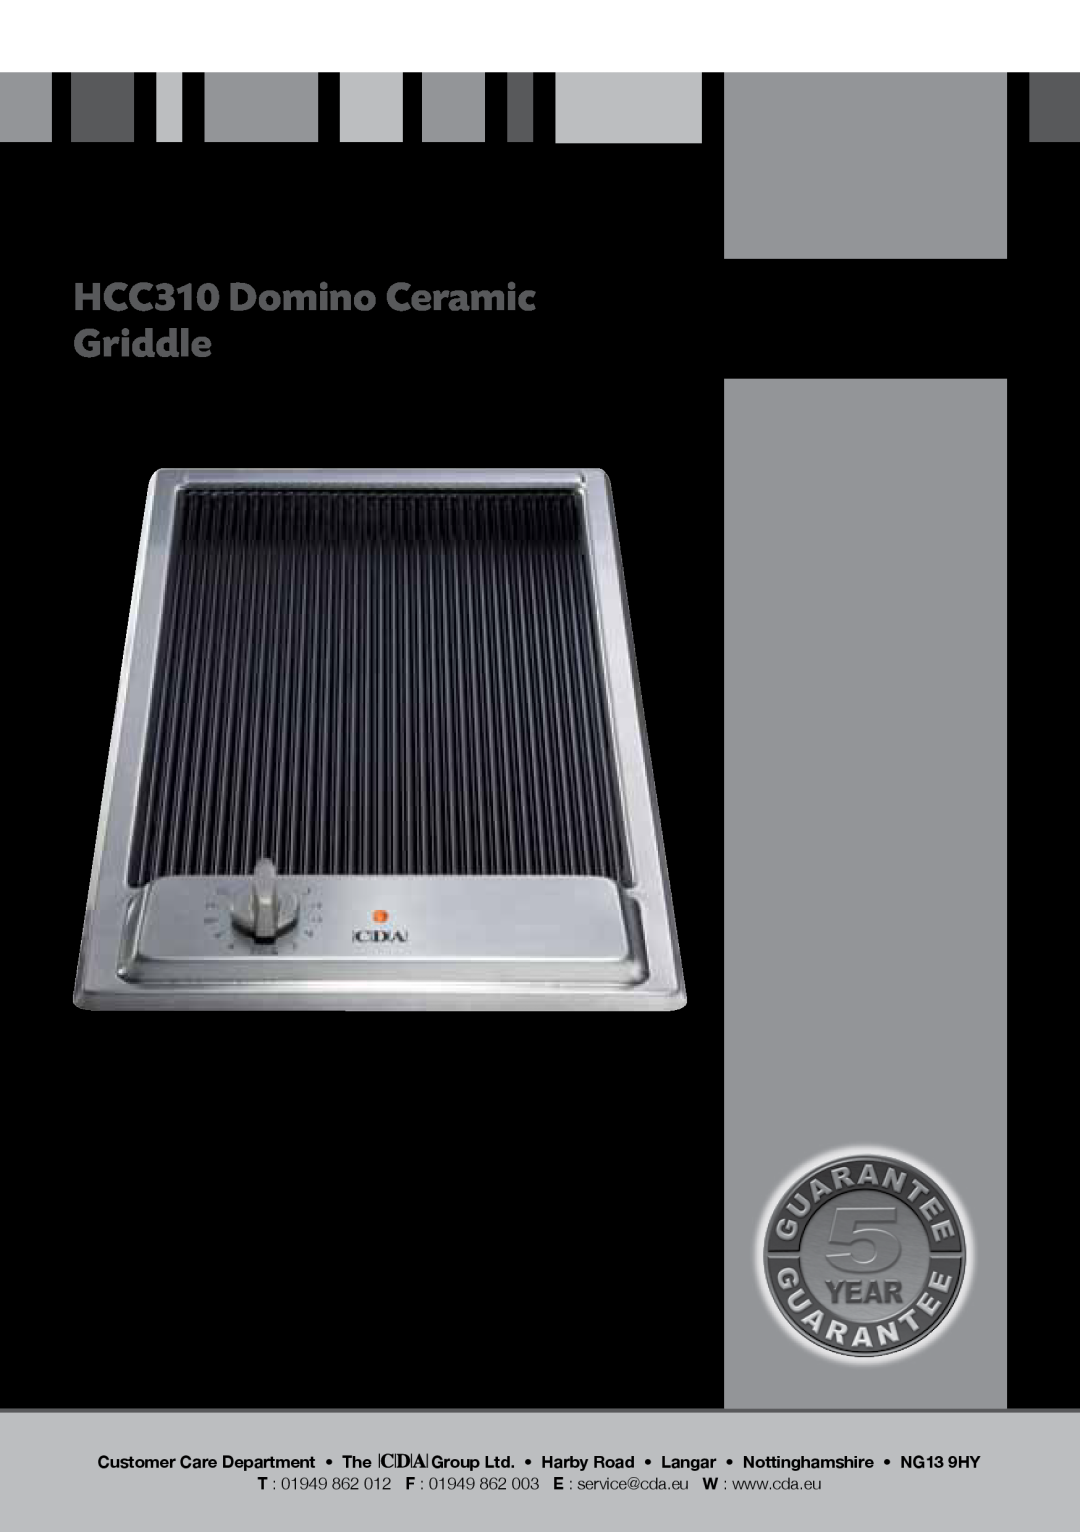 CDA manual HCC310 Domino Ceramic Griddle, Manual for Installation, Use and Maintenance, Customer Care Department The 